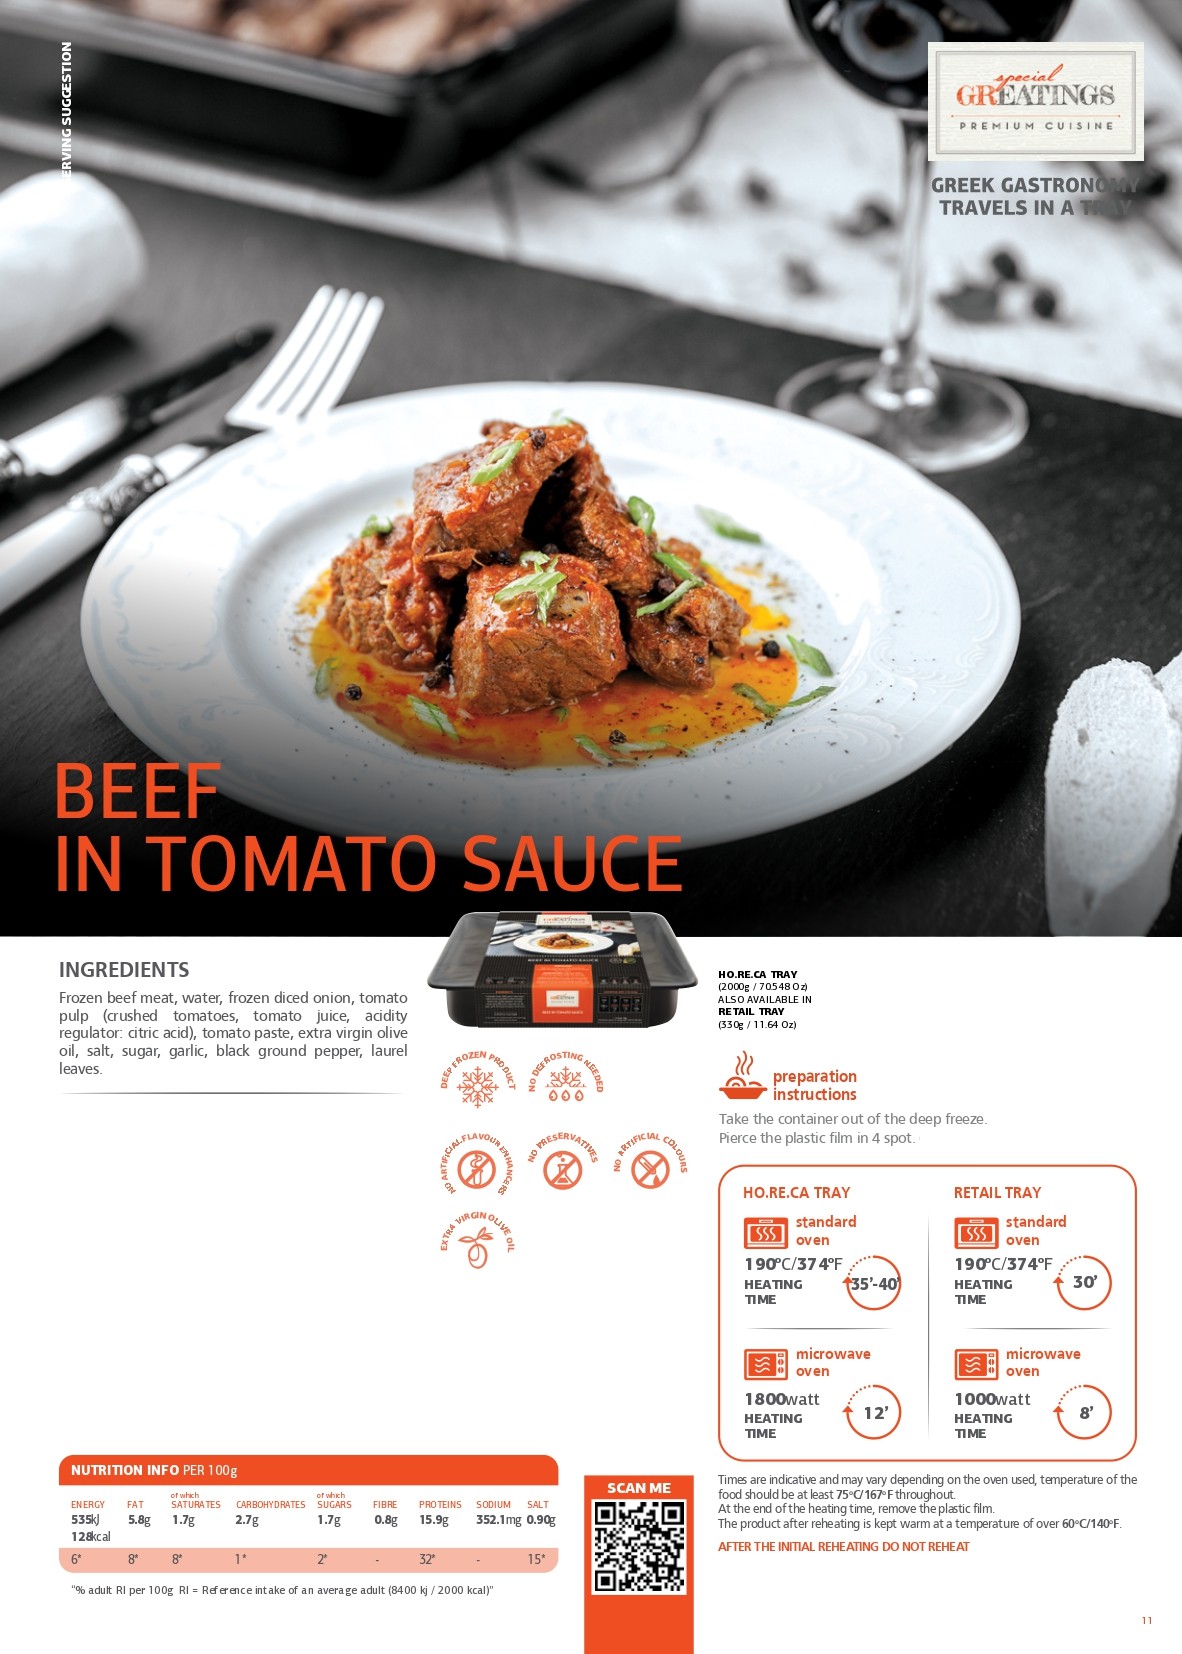 Beef in tomato sauce pdf image